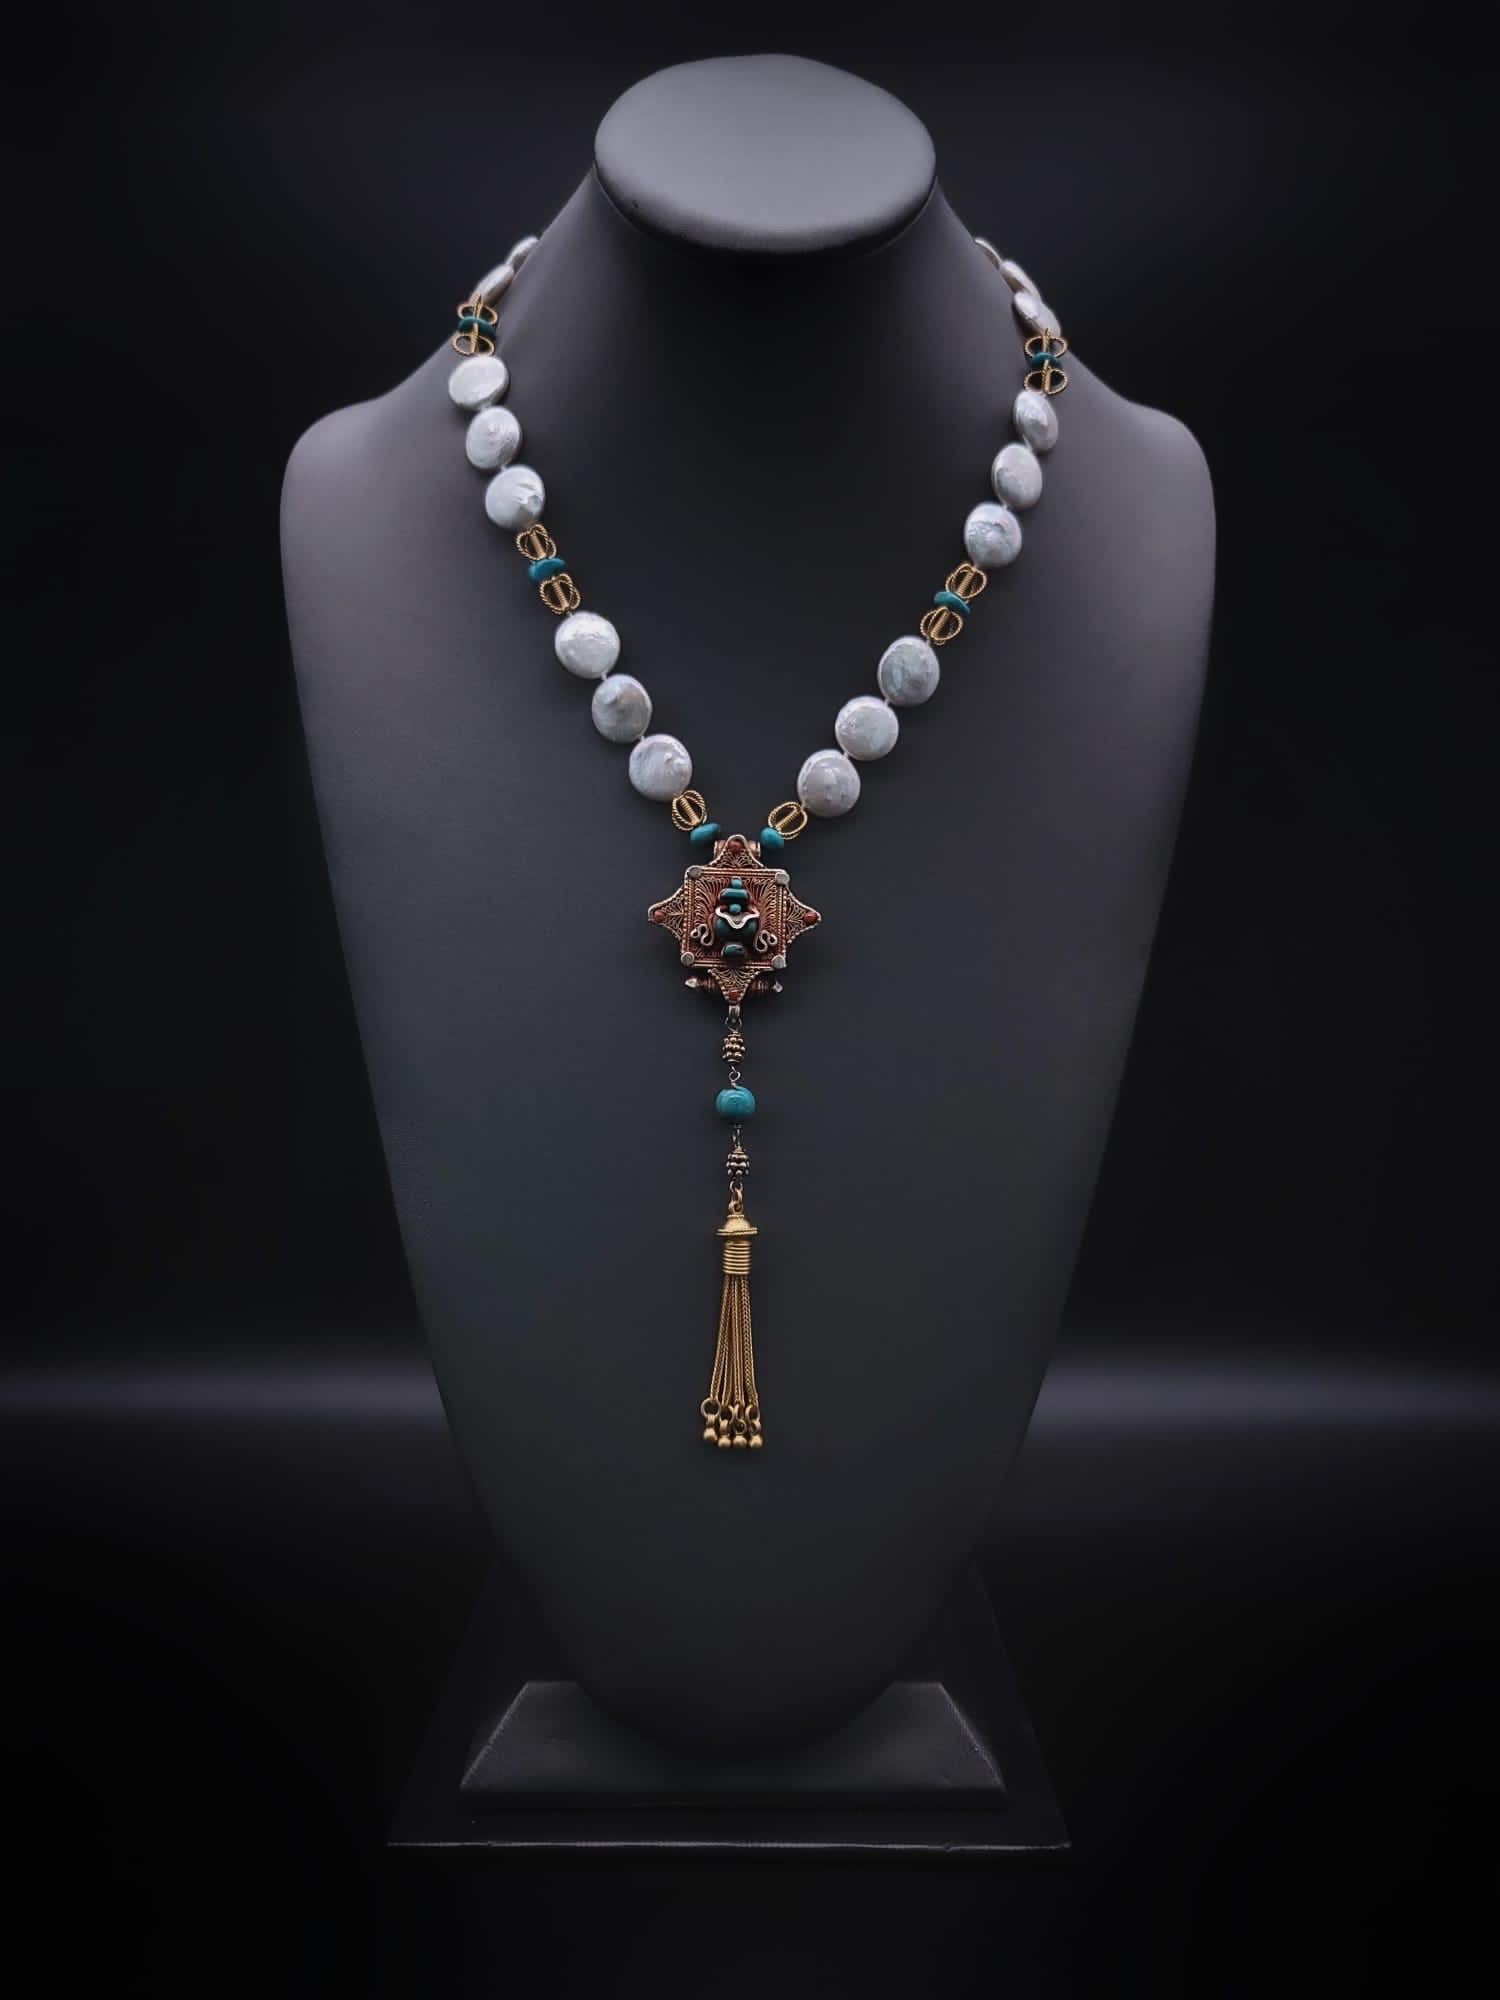 One-of-a-Kind

A delicate necklace of coin Pearls, Turquoise, and vermeil spacers complement the lovely Ghau box it encircles. Ghau box is a precious hand-crafted amulet, usually made in a Tibetan monastery, as this one is.
Traditionally worn around